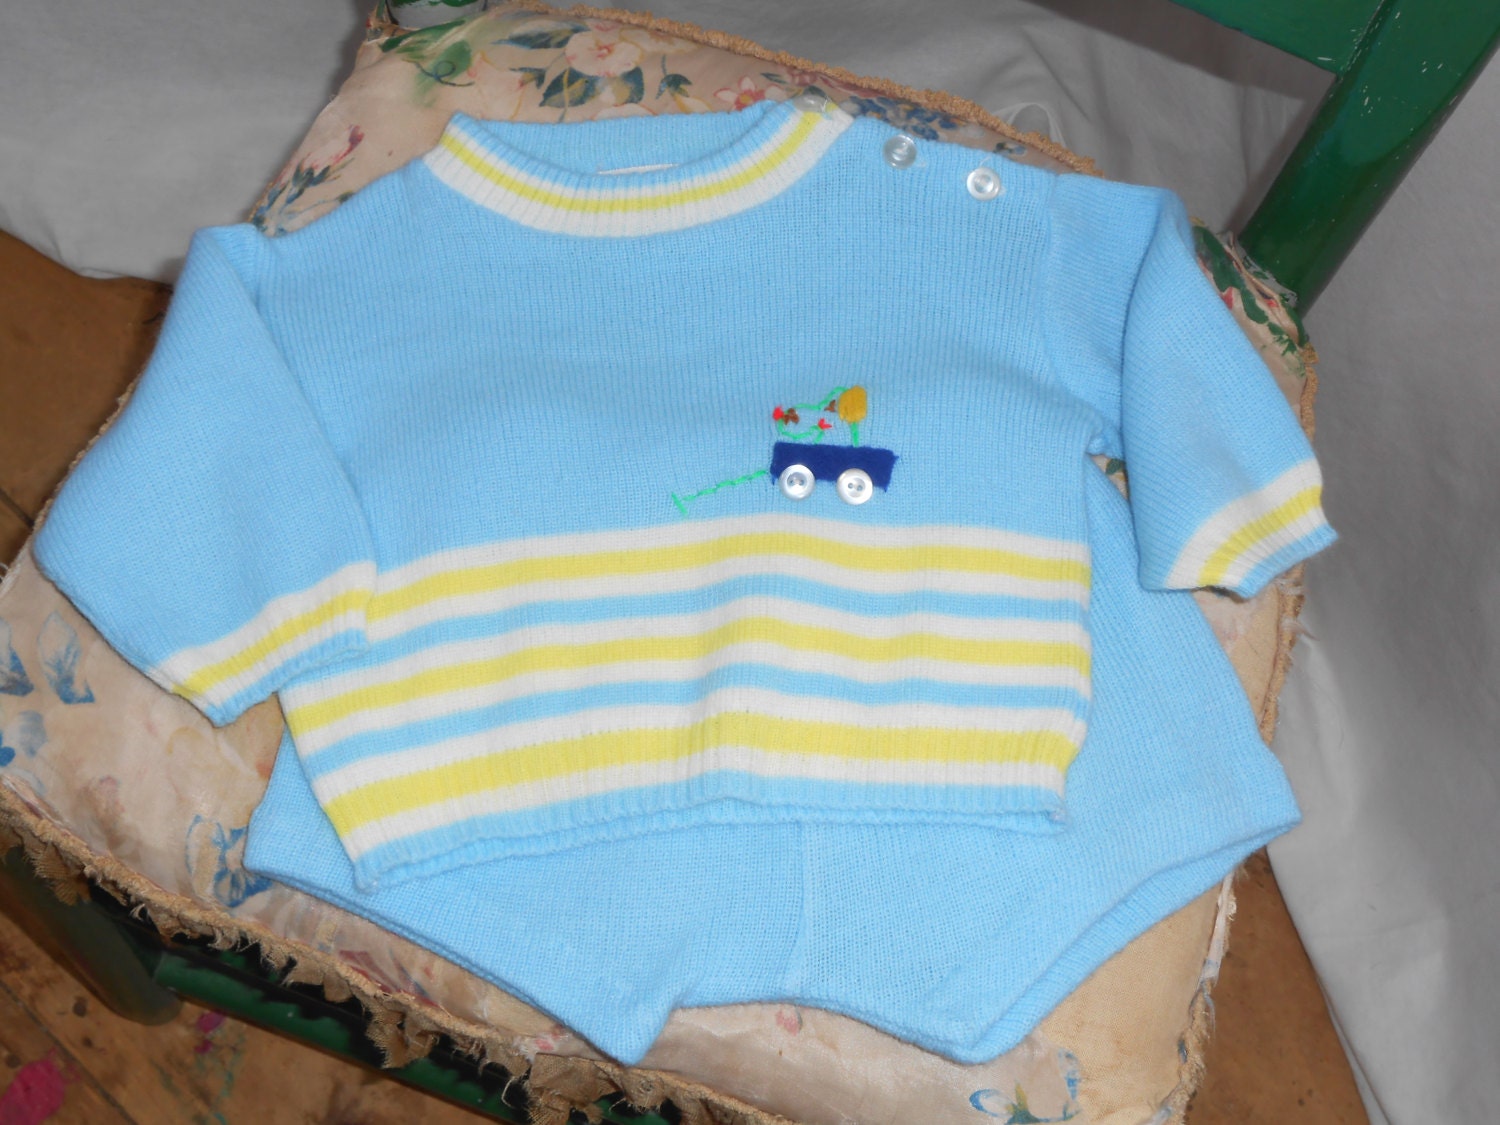 70s Baby Clothes Baby Boy's Knit 2 Piece Outfit 70s